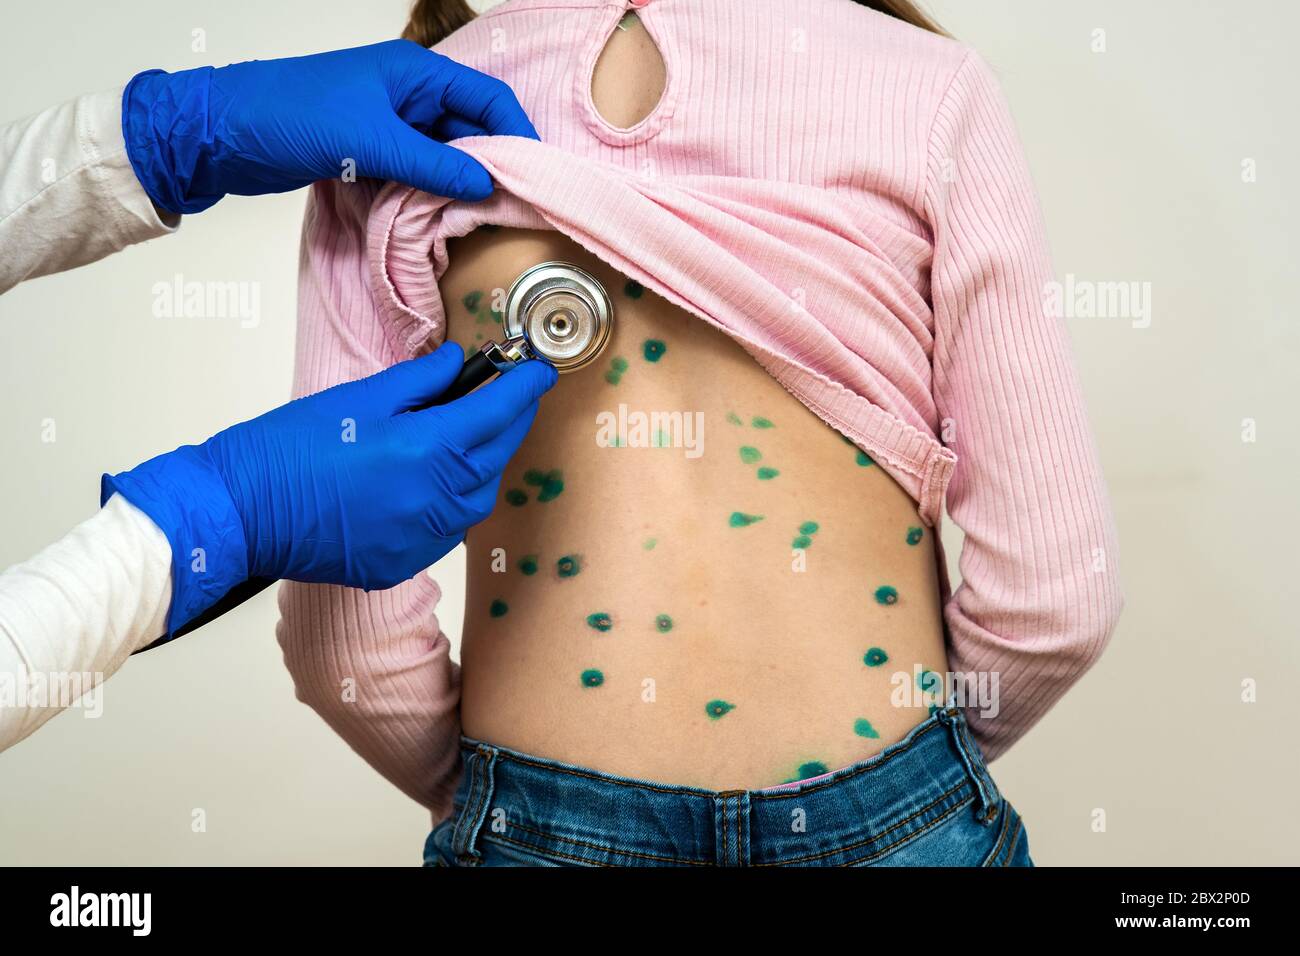 Doctor examining a child with stethoscope covered with green rashes on back ill with chickenpox, measles or rubella virus. Stock Photo